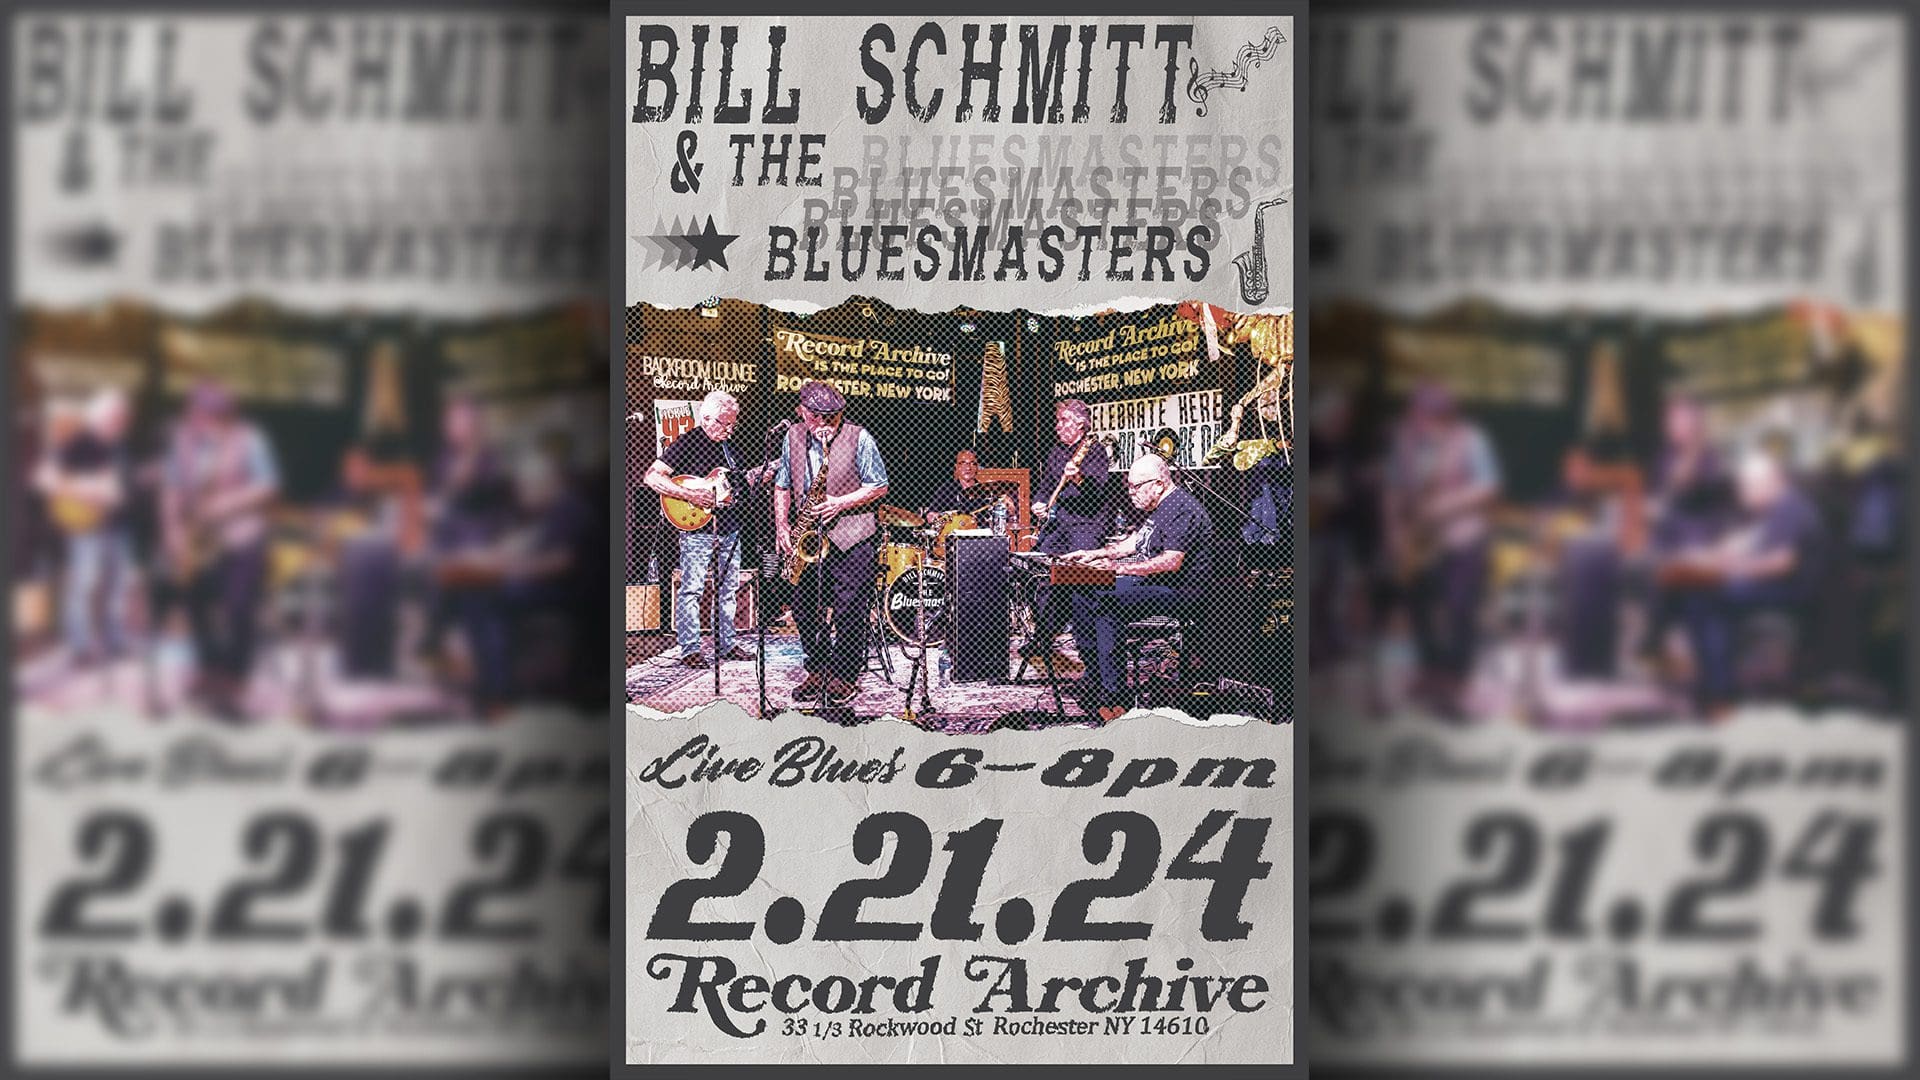 Bill Schmitt and the Bluesmasters. Live Blues 6-8pm. 2.21.24 Record Archive 33 1/3 Rockwood St Rochester NY 14610.